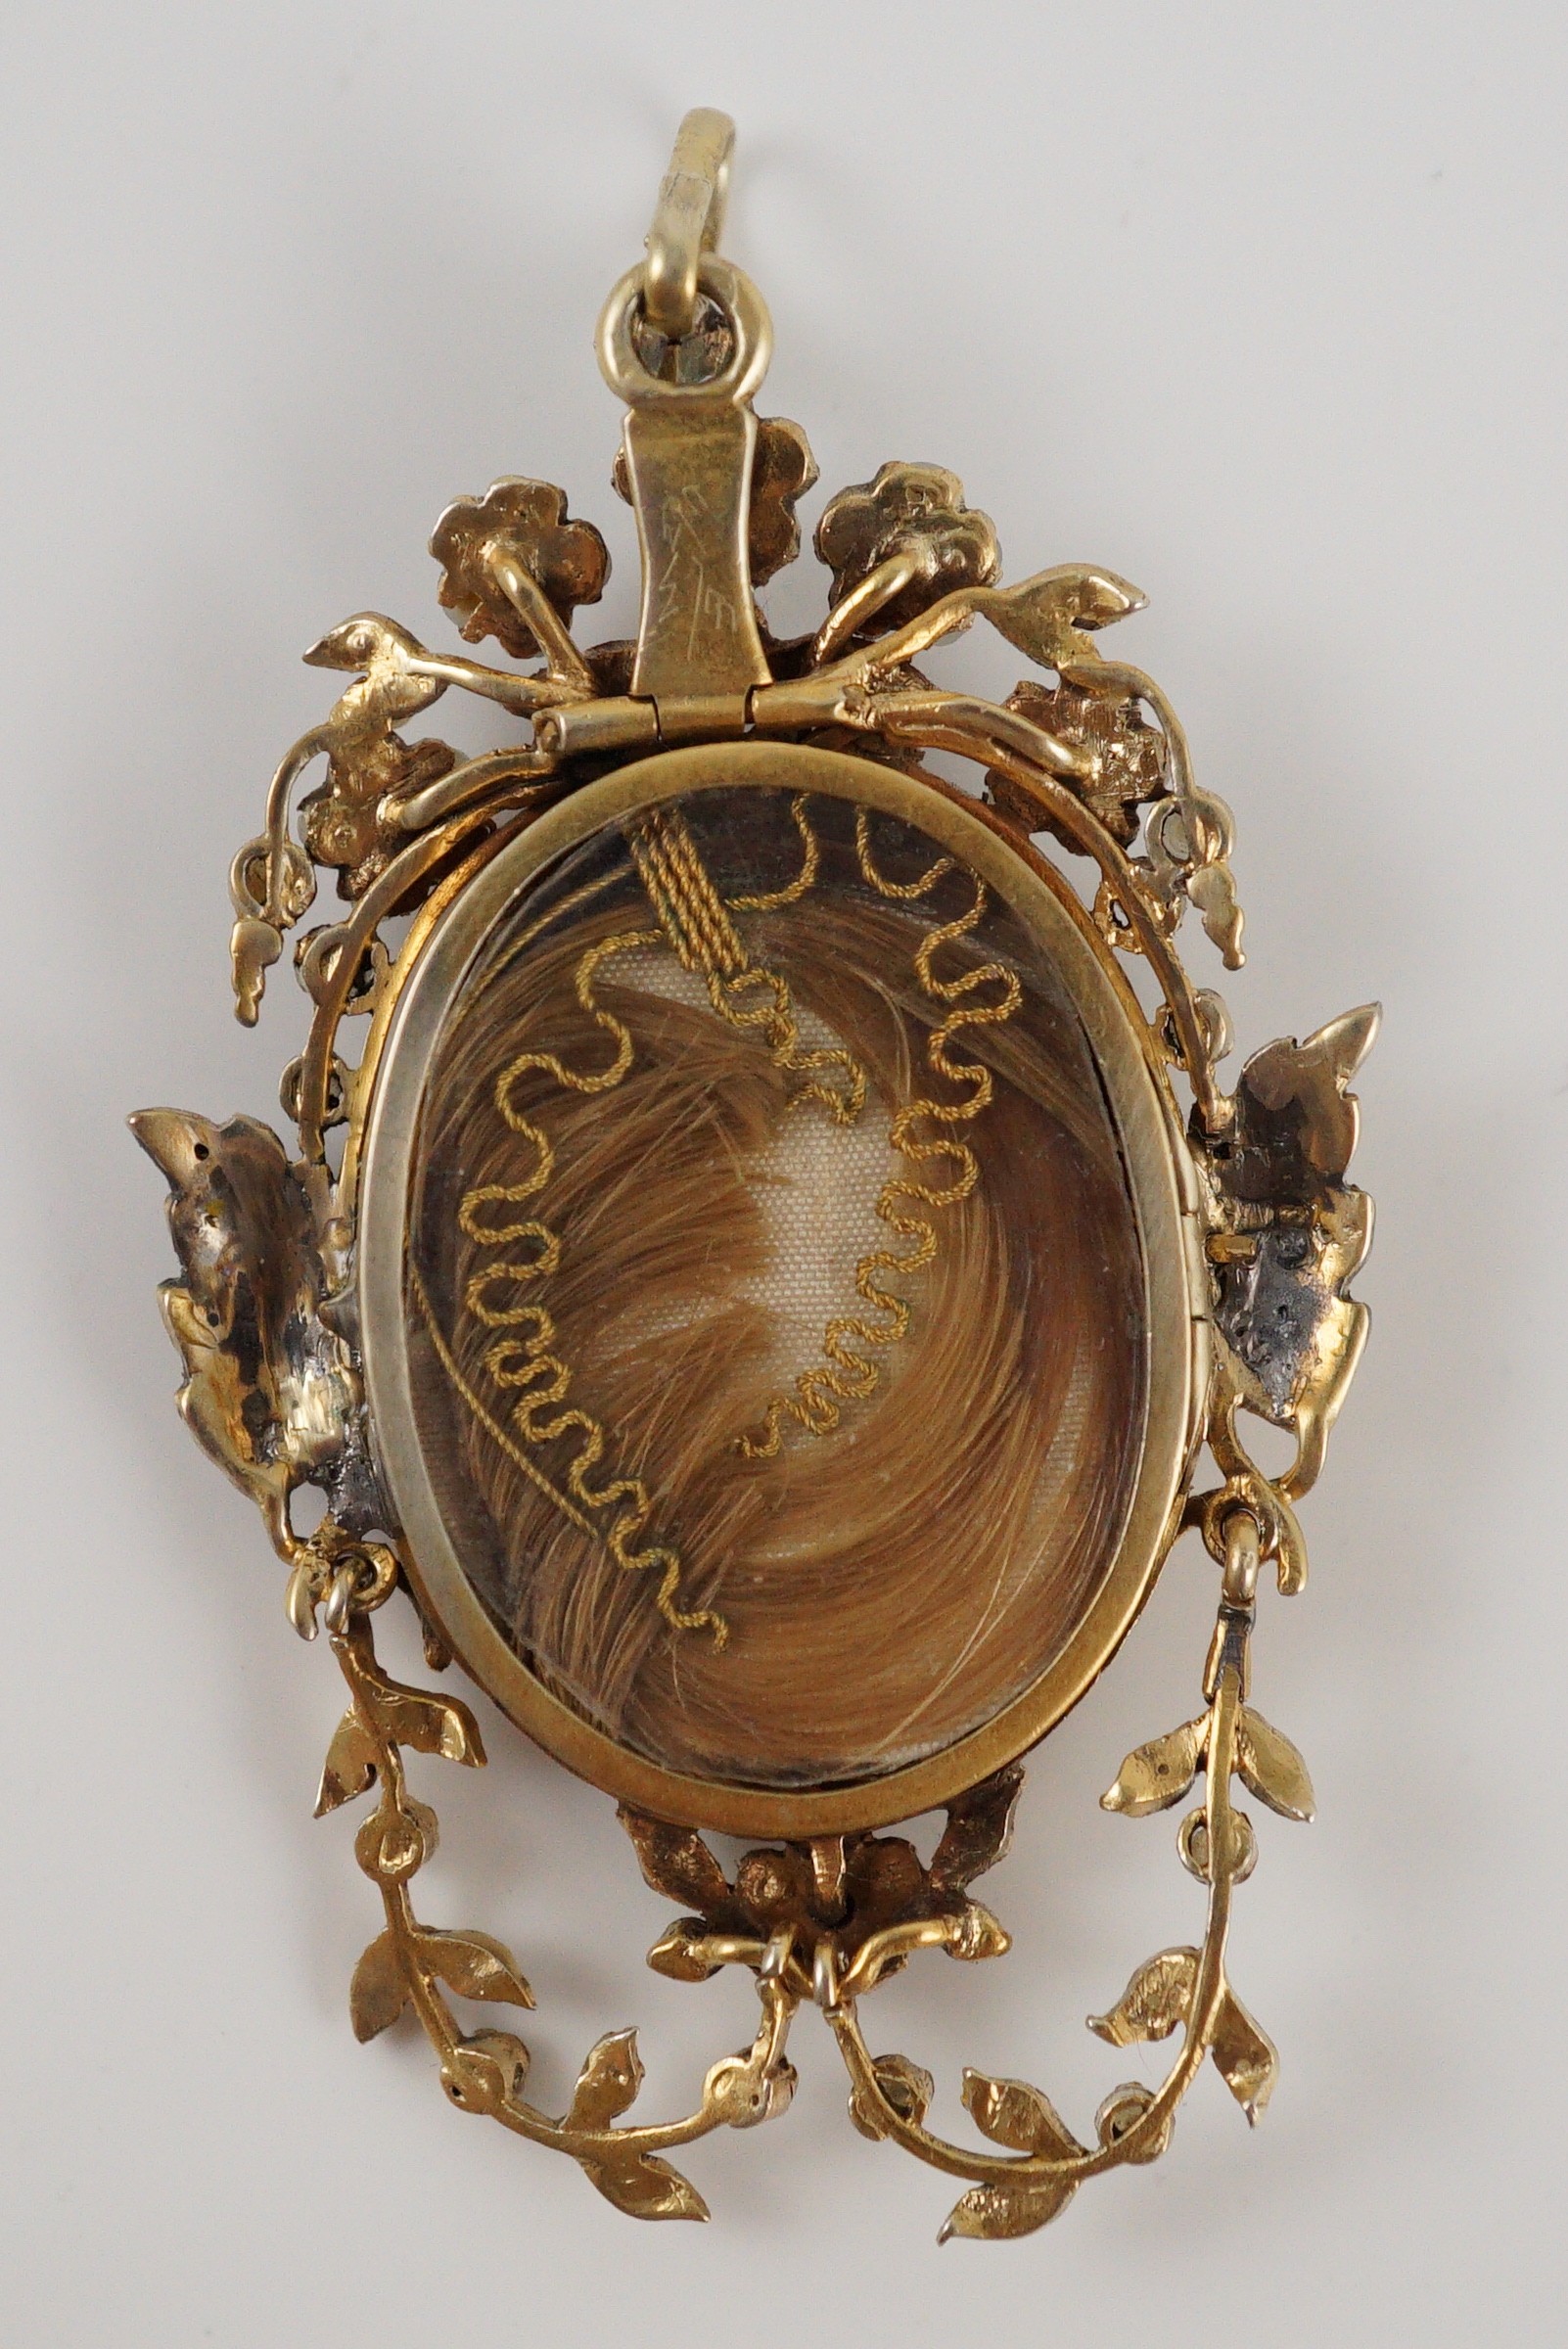 A Regency parcel gilt silver seed pearl and enamel set oval pendant, with inset ivory panel of a semi-clad figure with a lyre